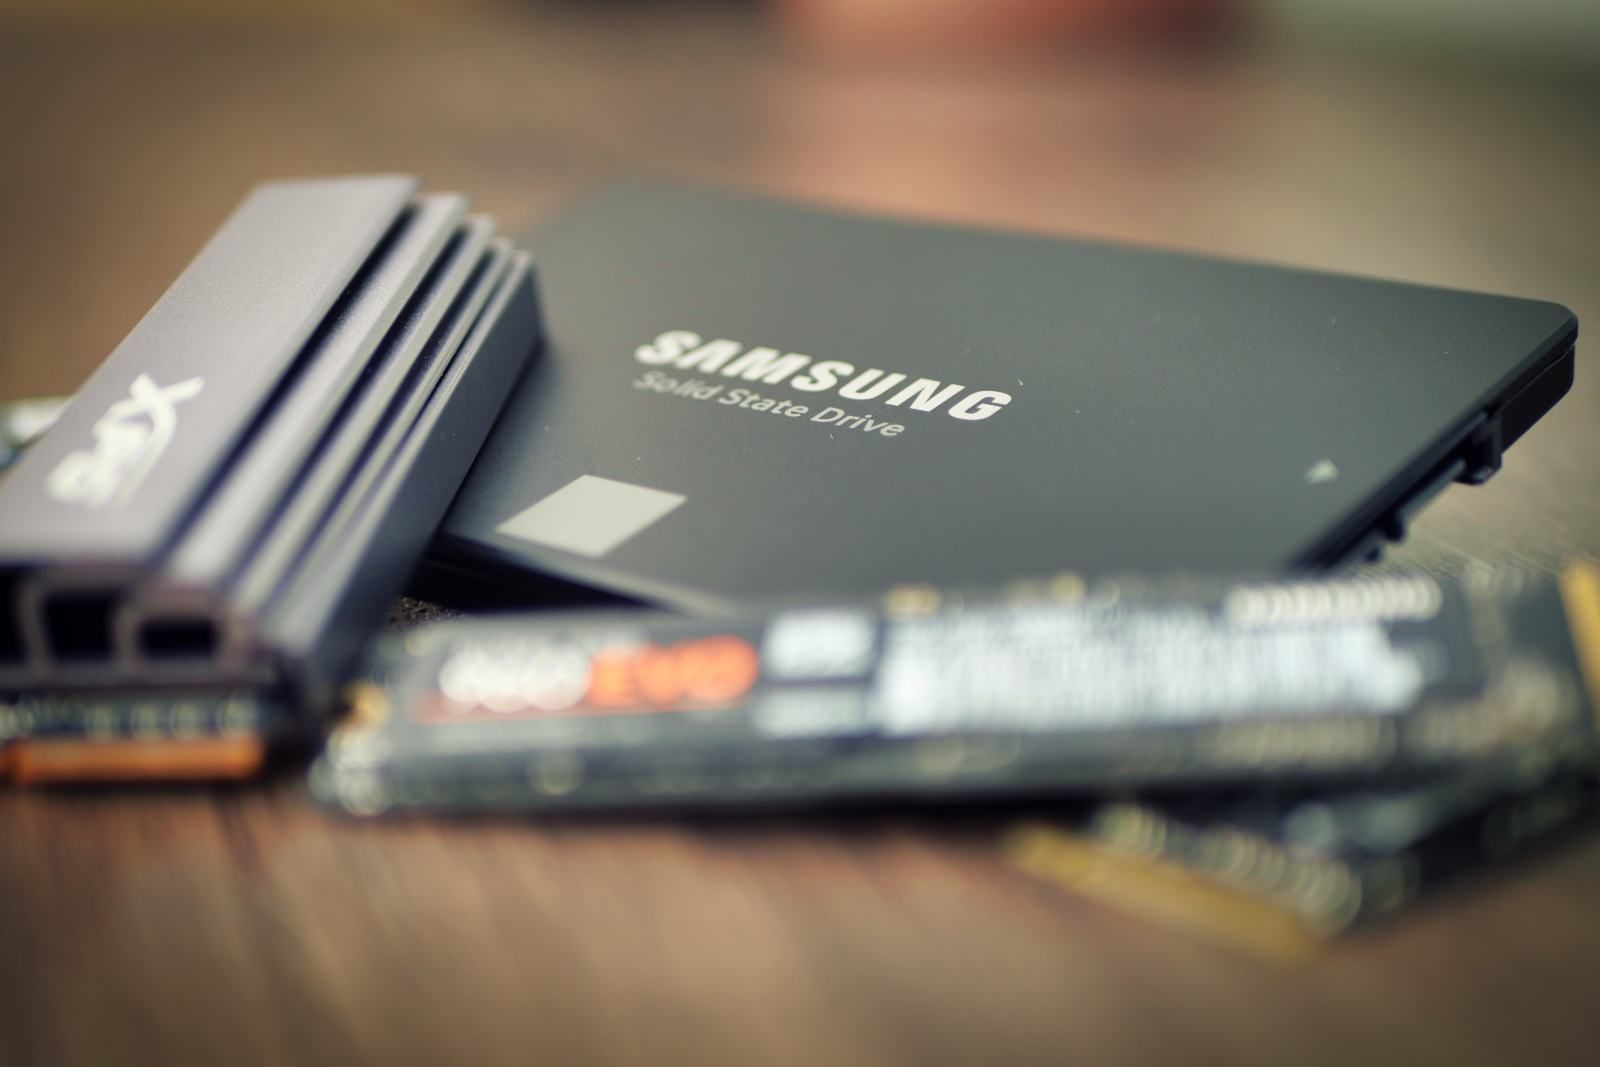 How to install an SSD in a gaming PC photo 7